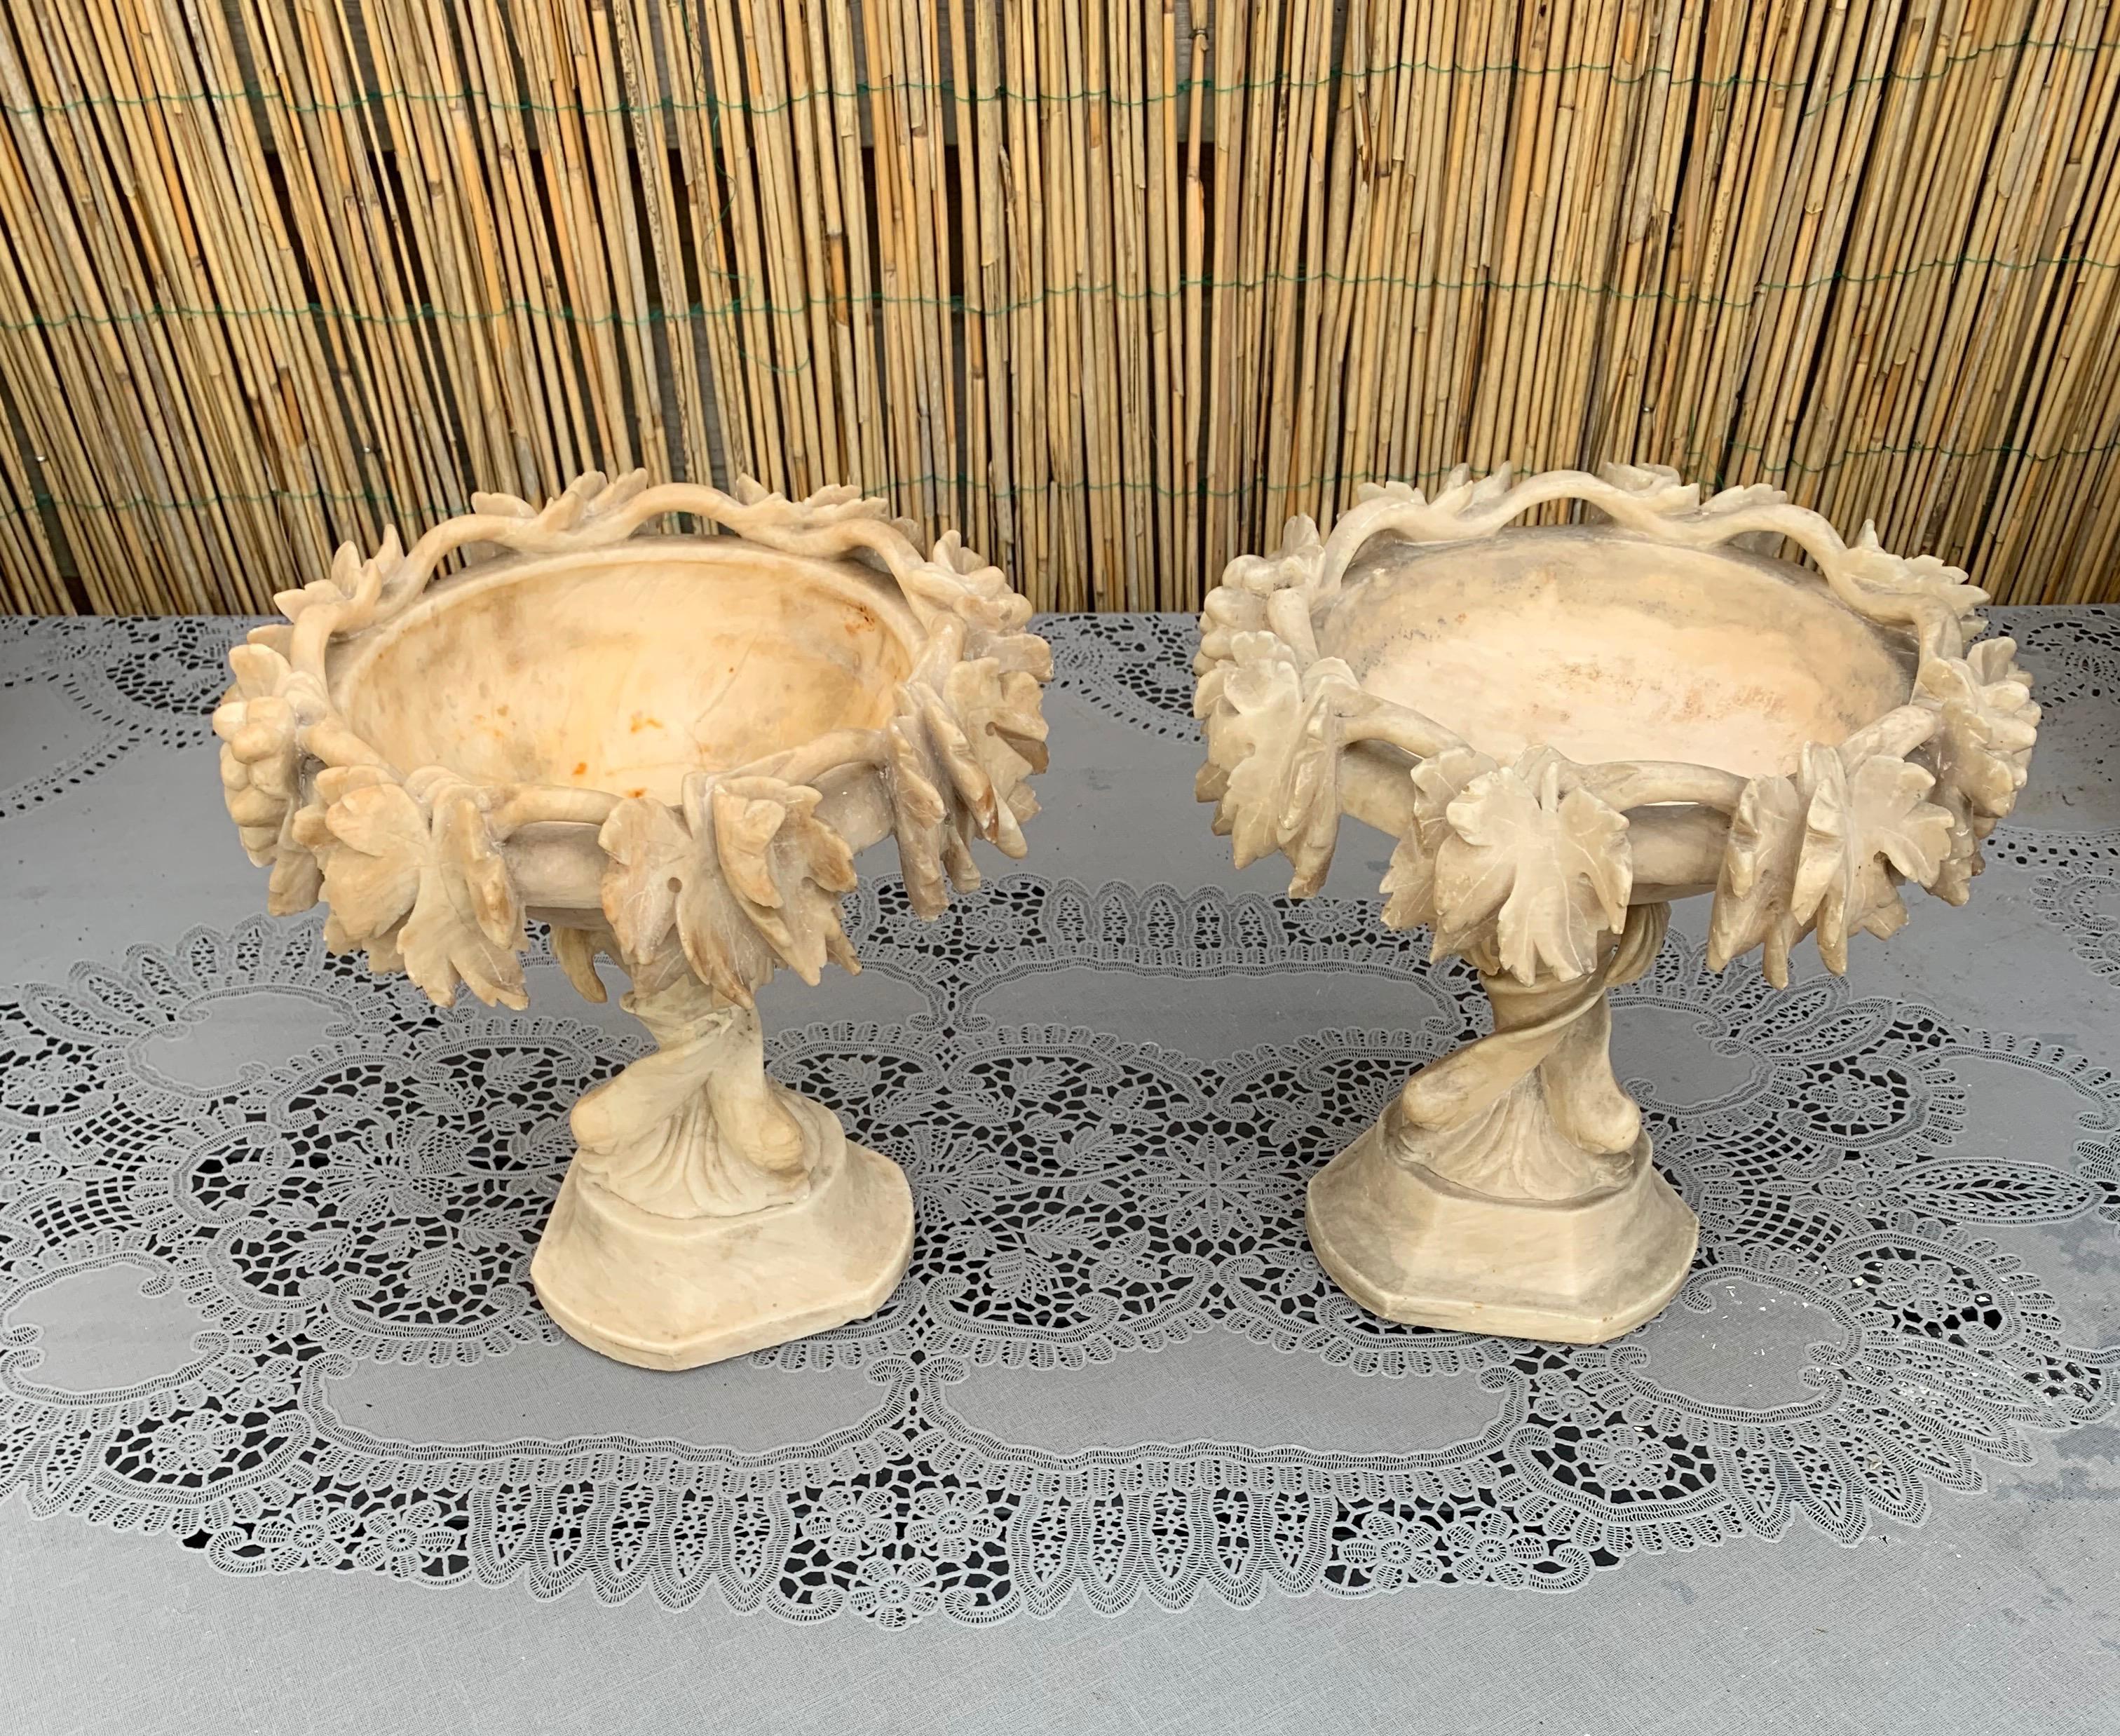 19th Century Antique & Rare Pair of Hand Carved Italian Alabaster Tazza Table Display Pieces